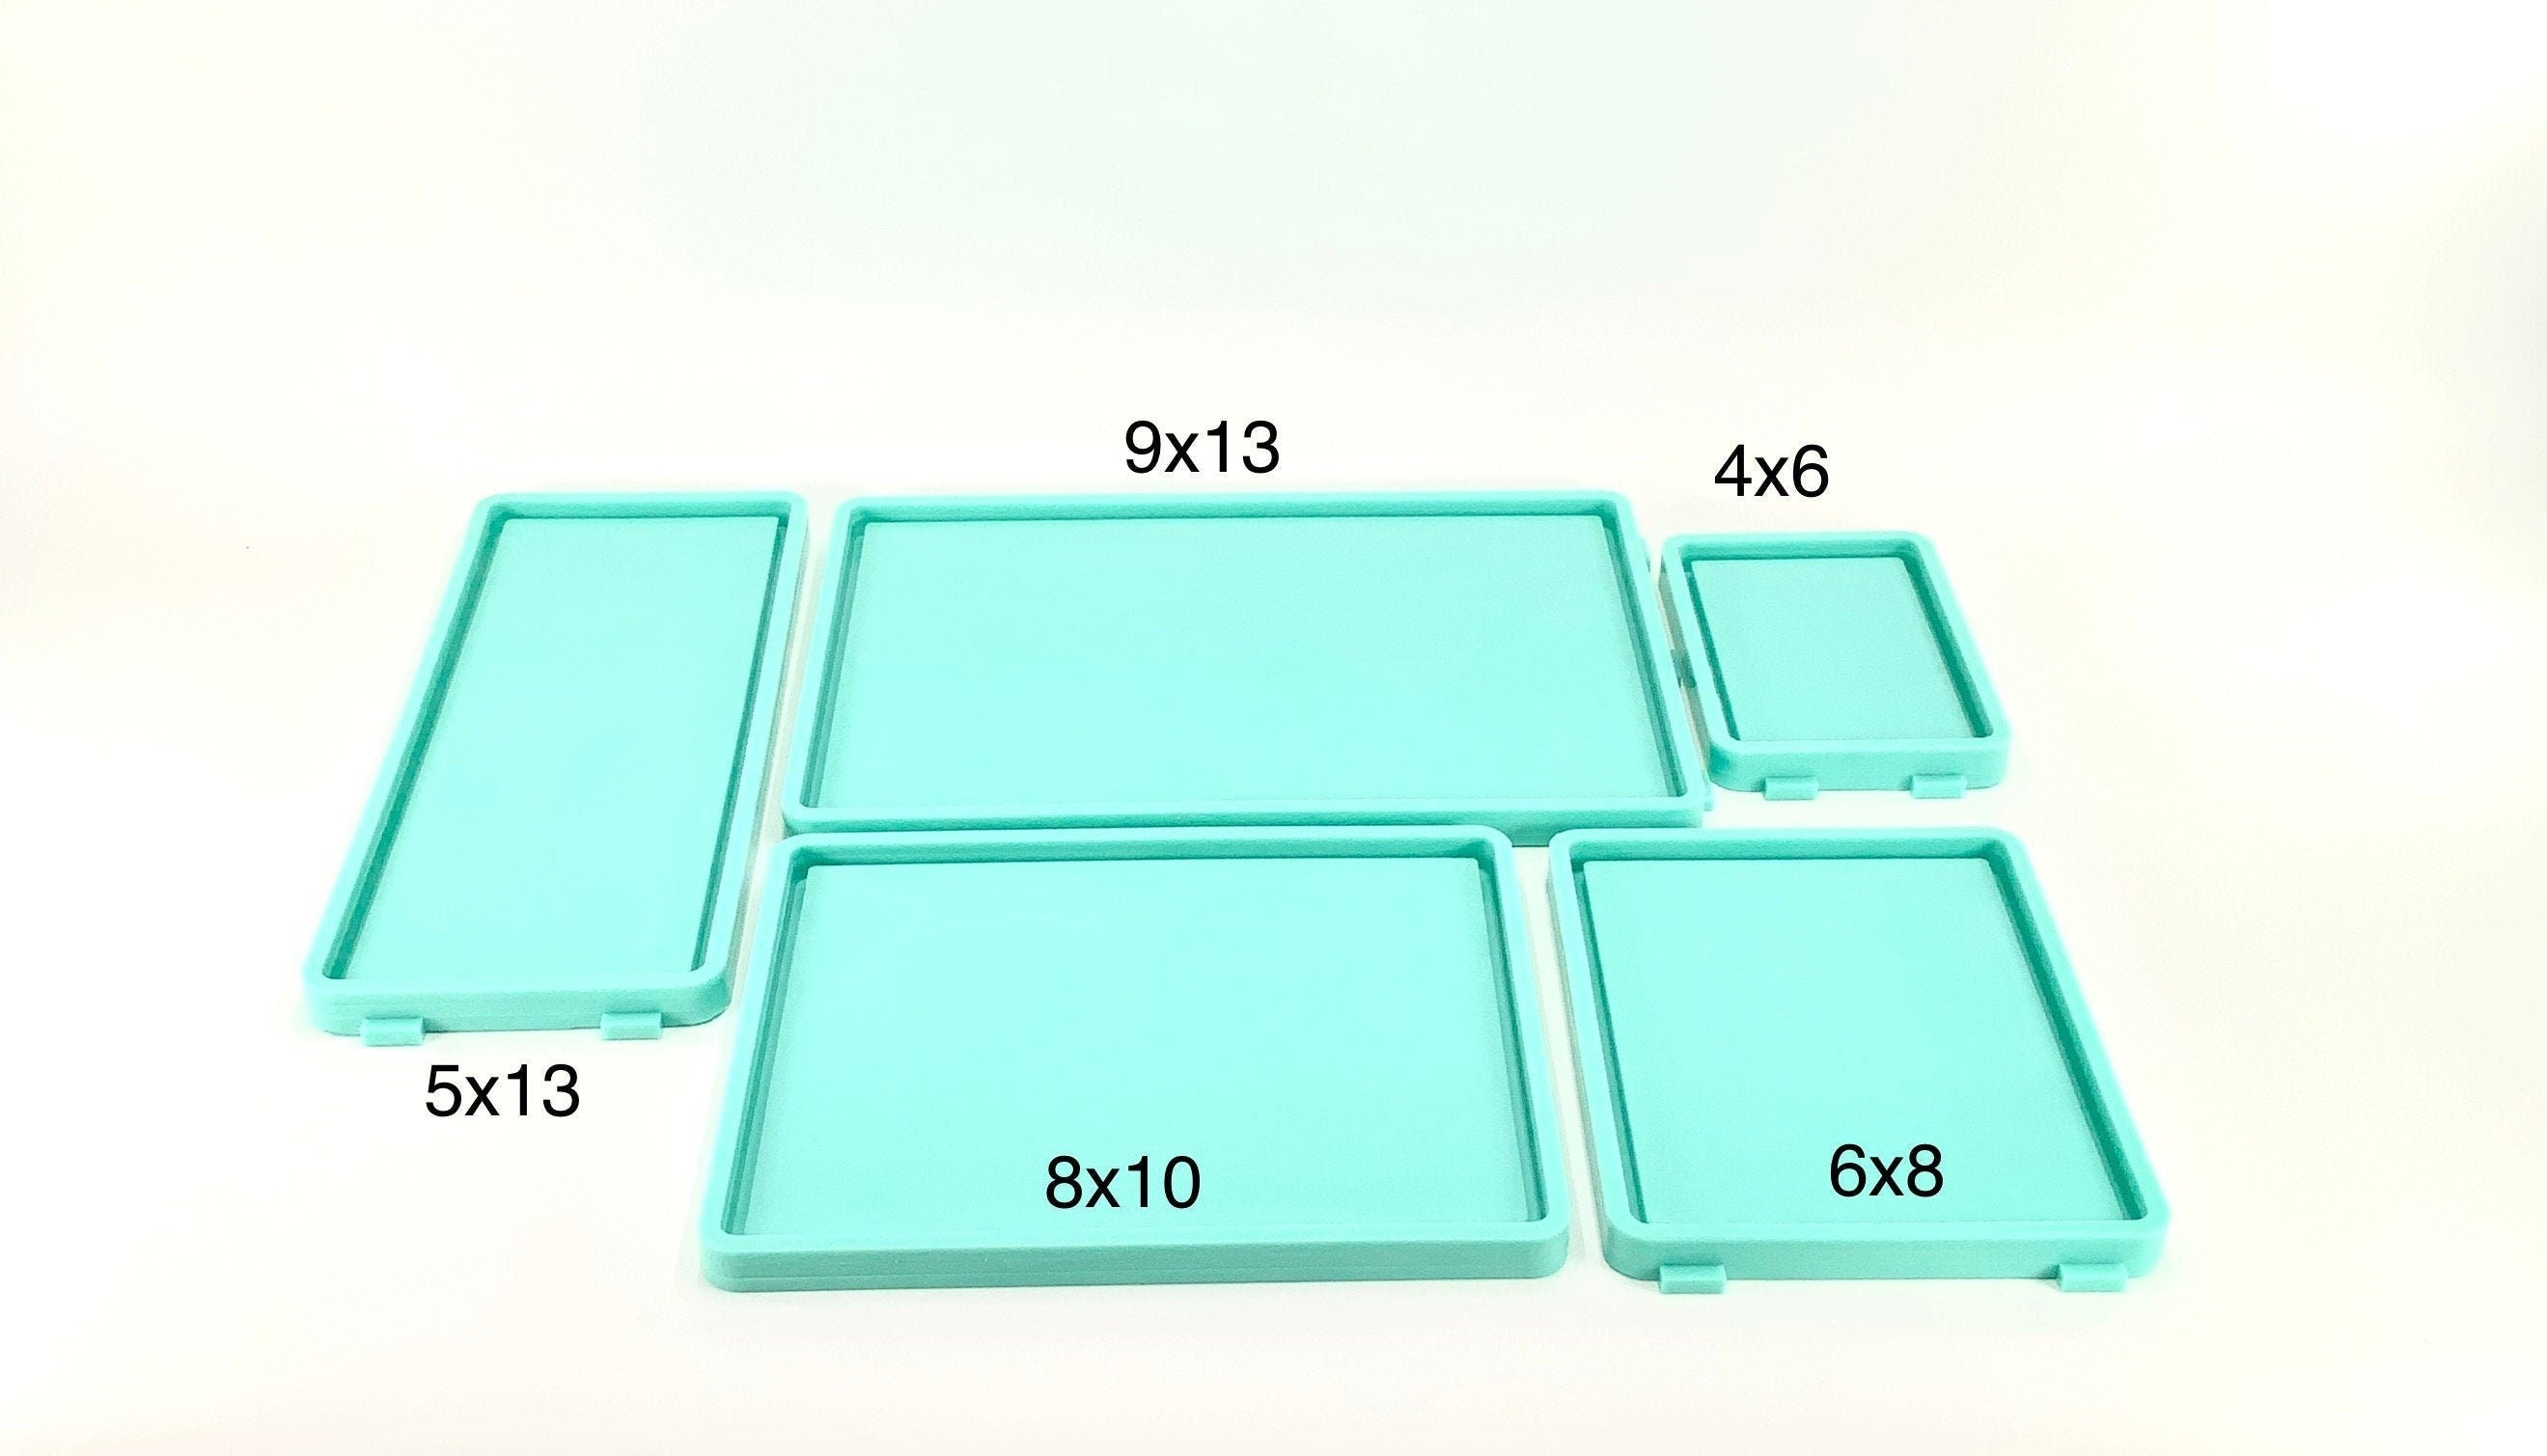 Rectangle Tray Mold Sizes 4x6, 6x8, 8x10, 5x13, 9x13 Rolling Tray Molds,  Rectangle Molds, Tray Molds 